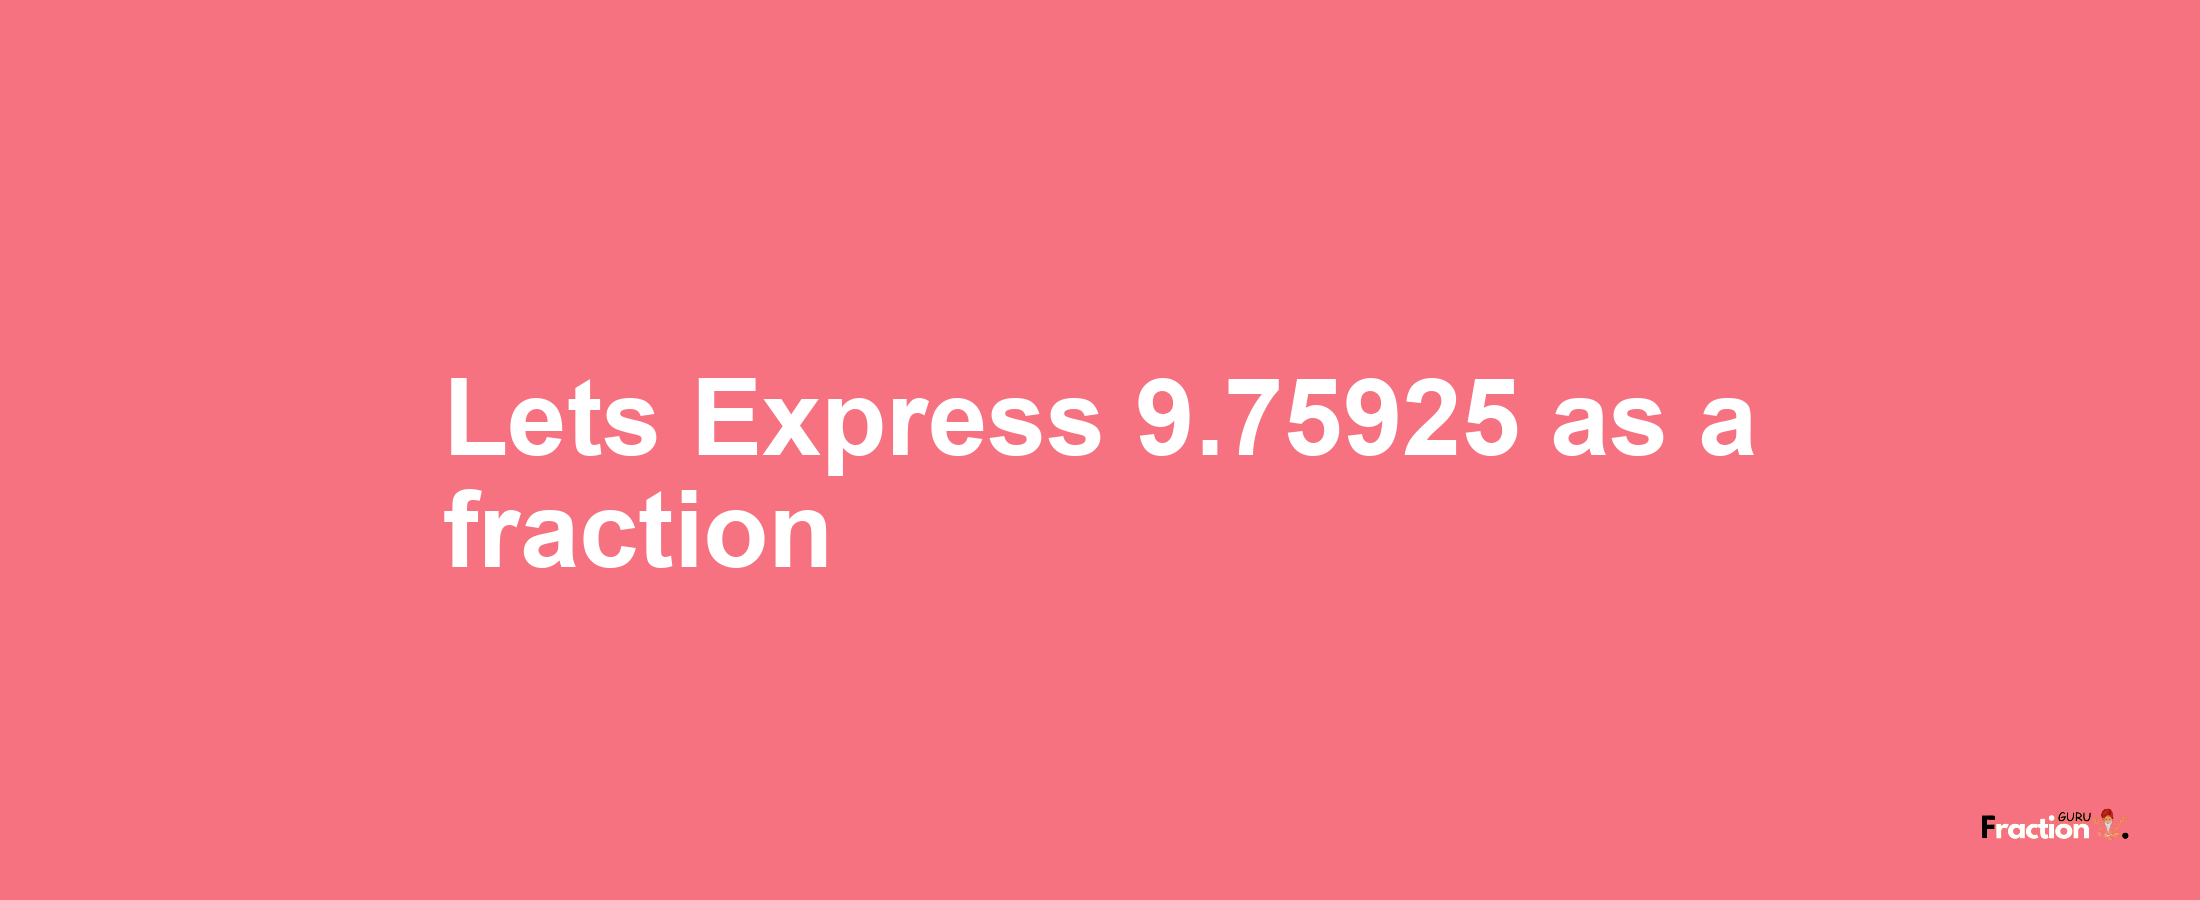 Lets Express 9.75925 as afraction